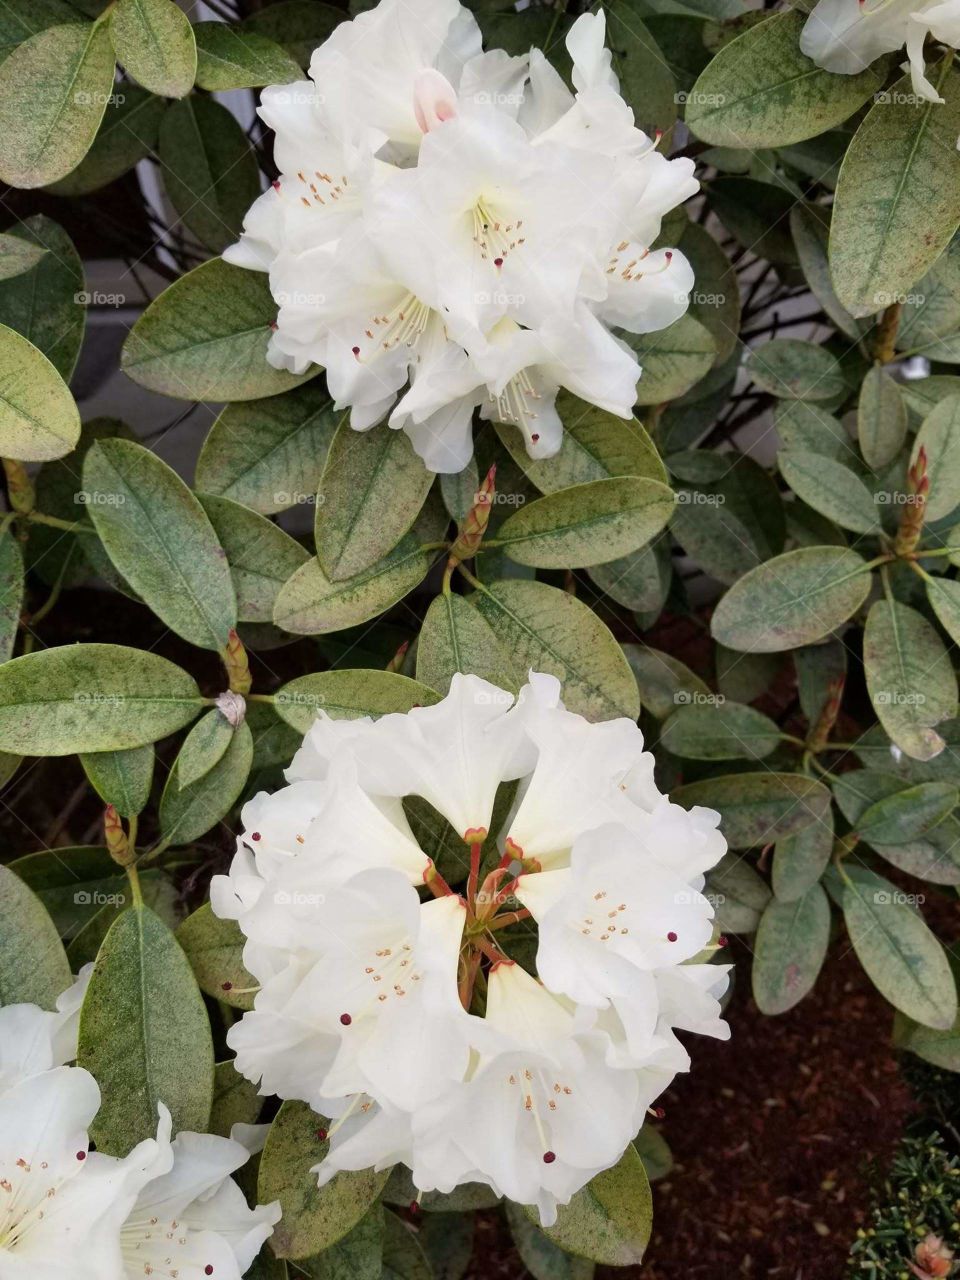 White rododendren flowers out side a church in Bothell Washington state USA. Picture taken in the morning